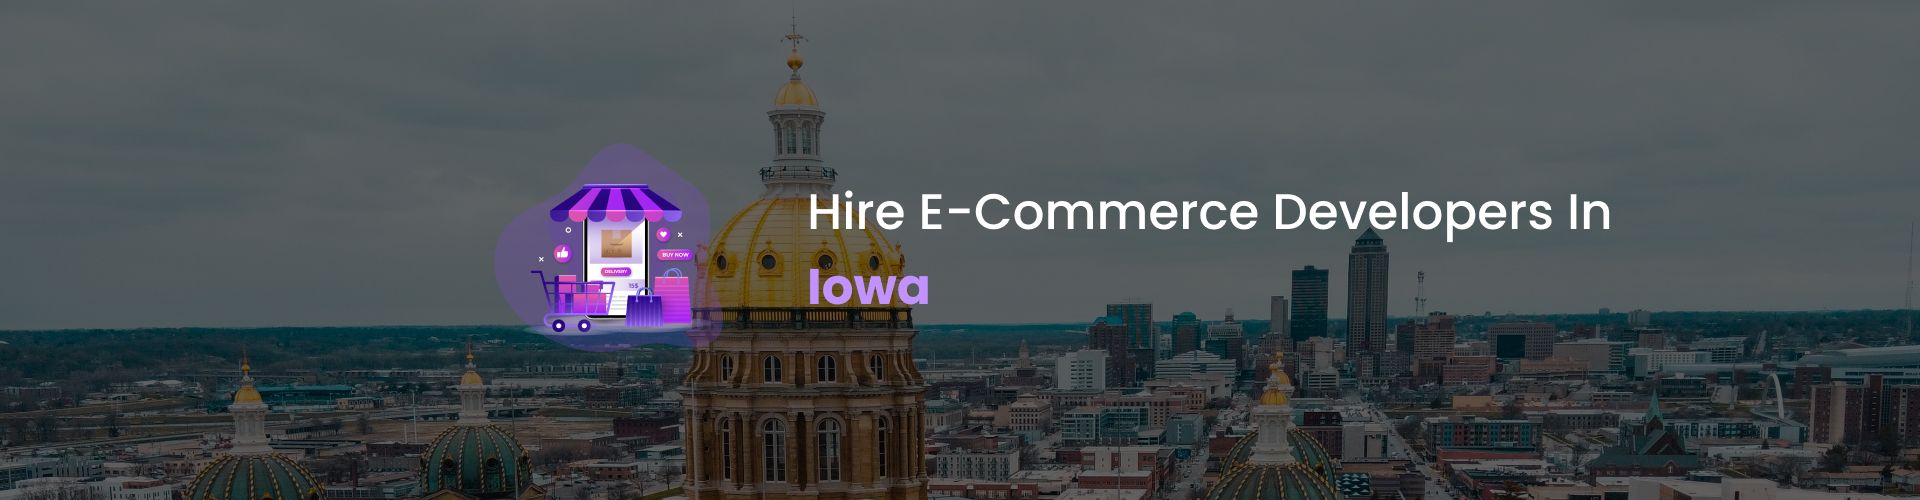 hire ecommerce developers in iowa